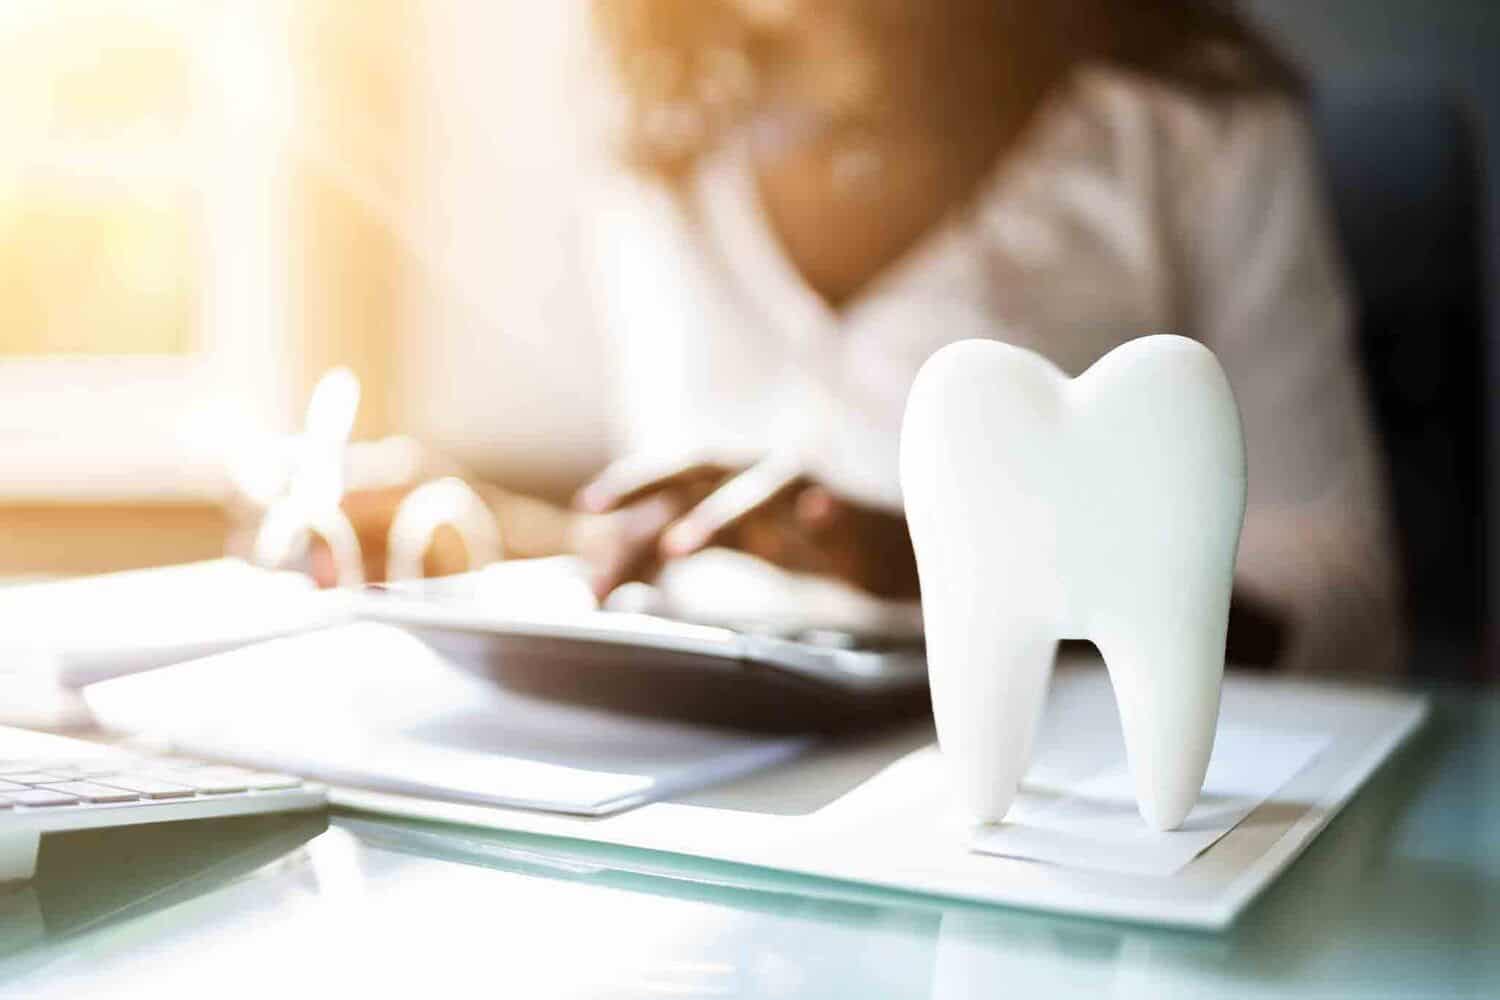 Is Teeth Whitening Safe? Understanding At-Home Kits vs. In-Office Treatments